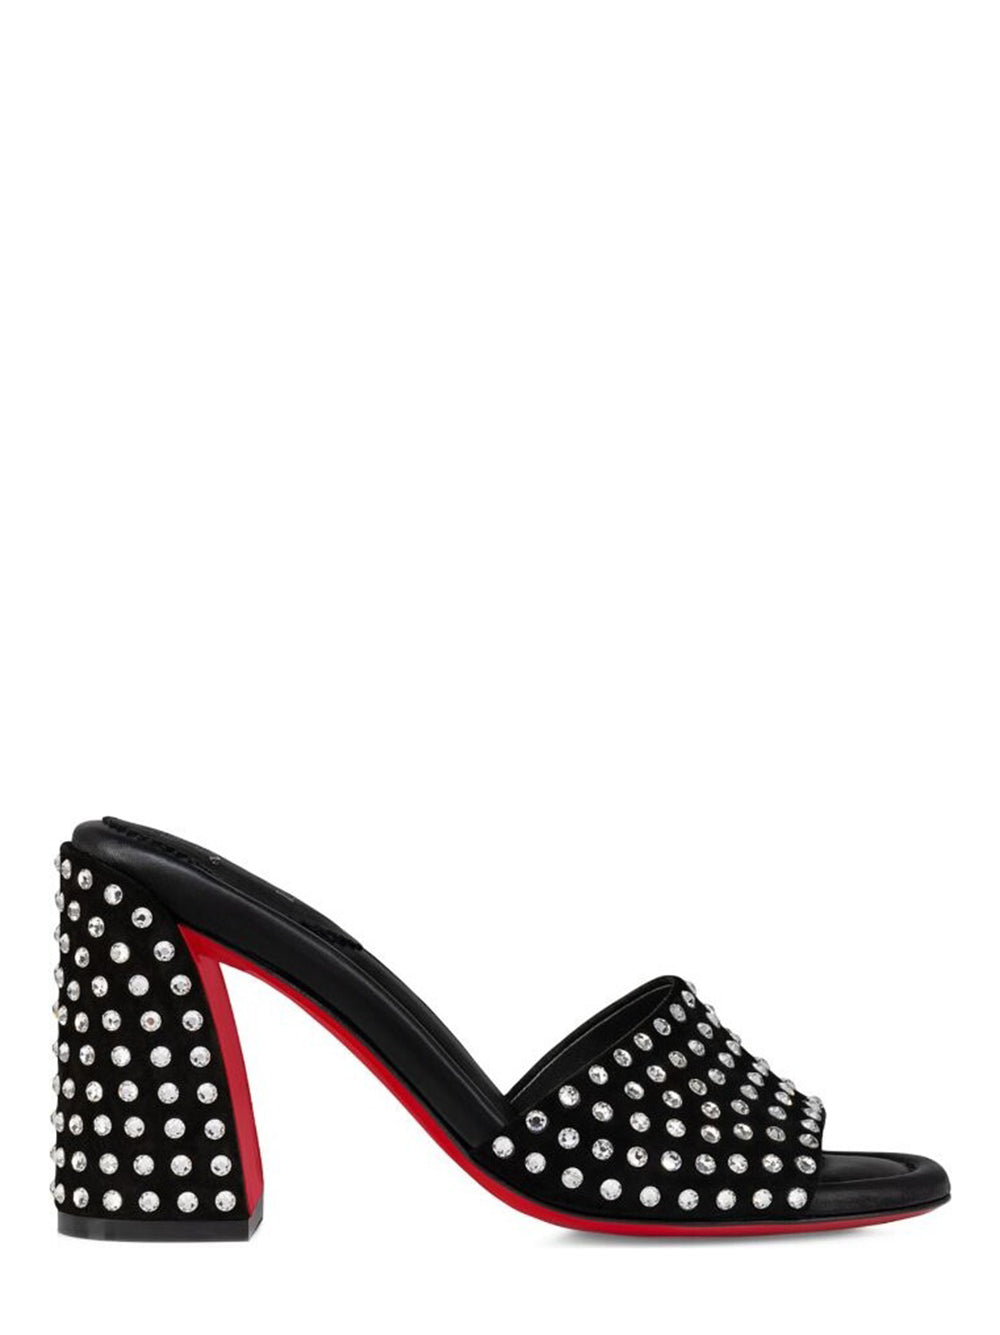 Christian Louboutin Jane Mule Strass Boum 85 in Black | In-Store Only